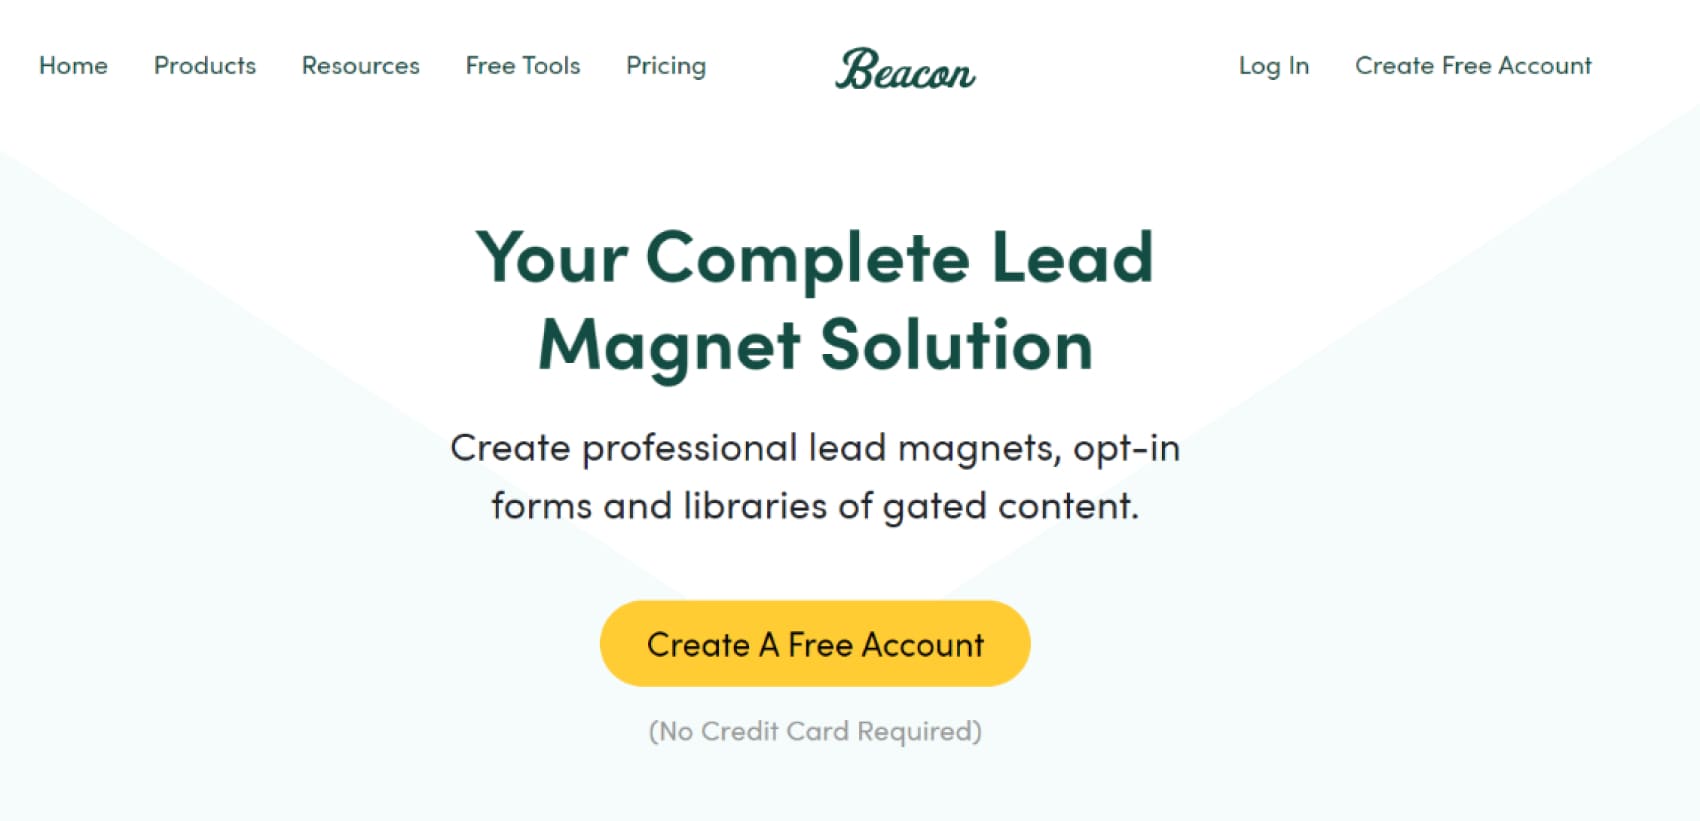 Beacon is a tool for inbound marketing